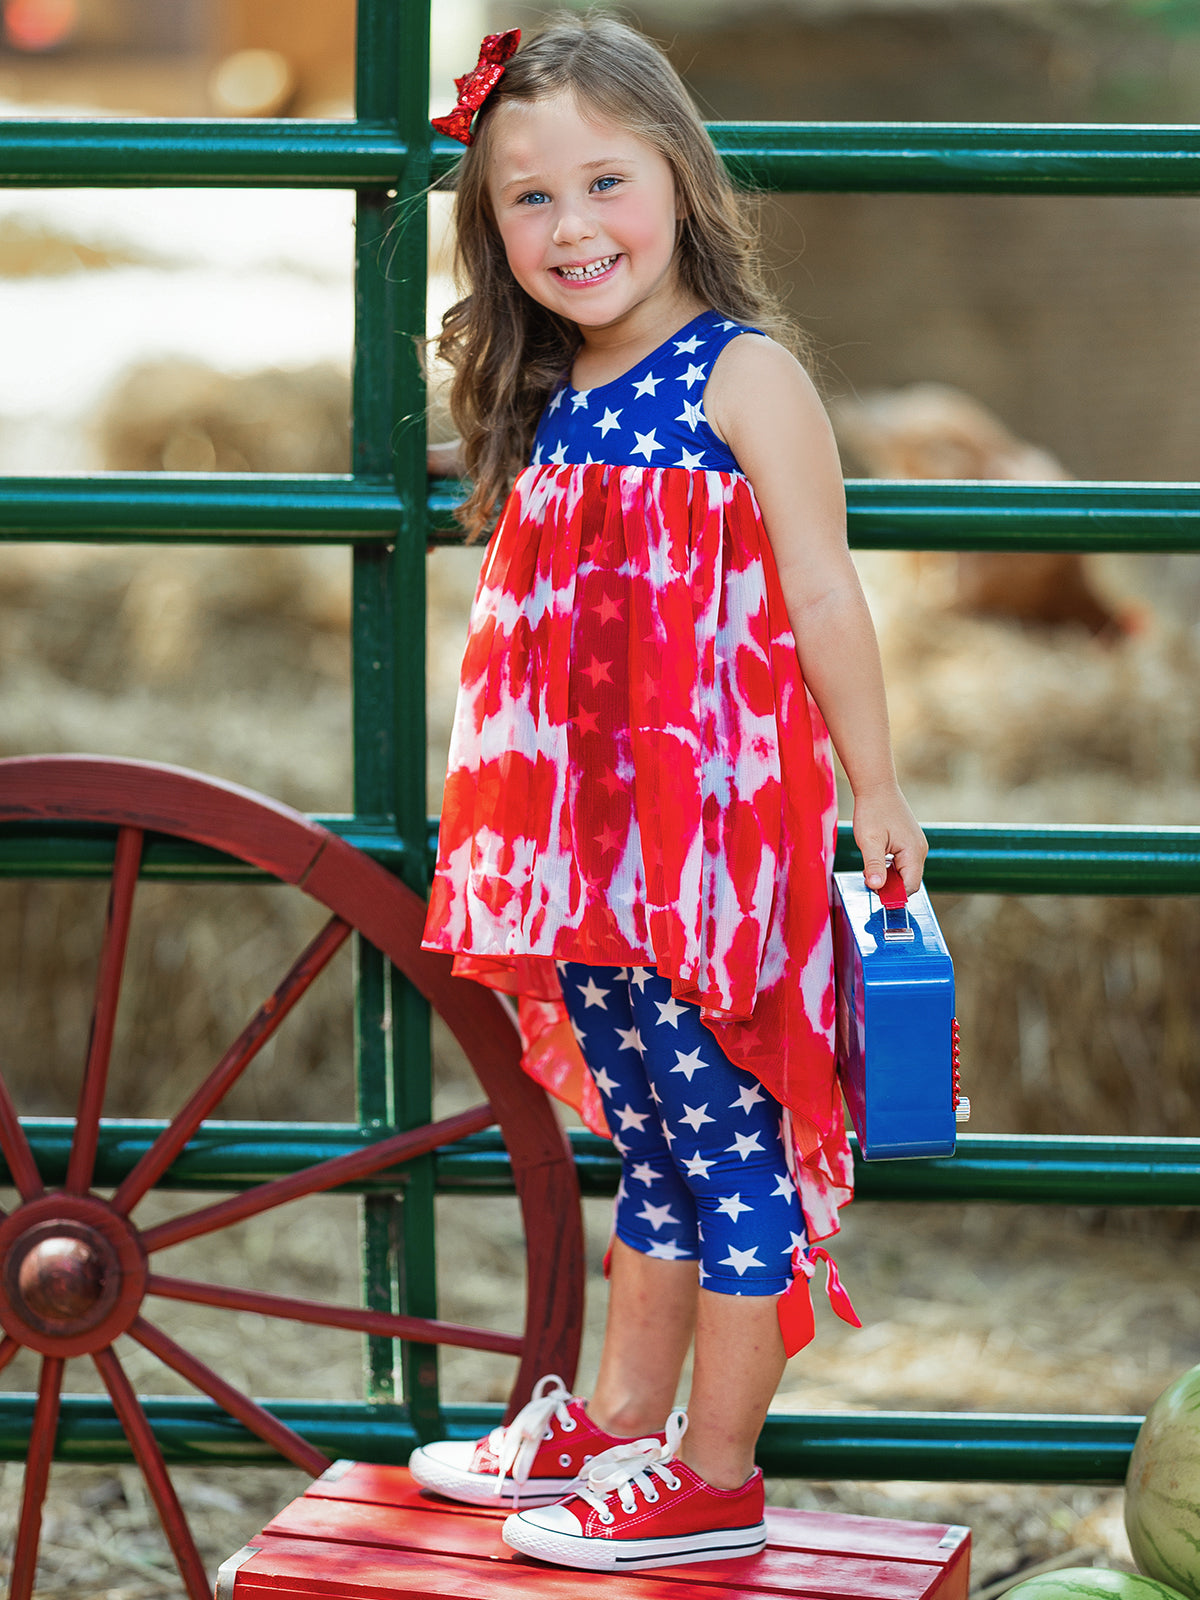 Mia Belle Girls Hi-Lo Tunic And Legging Set | 4th of July Outfits